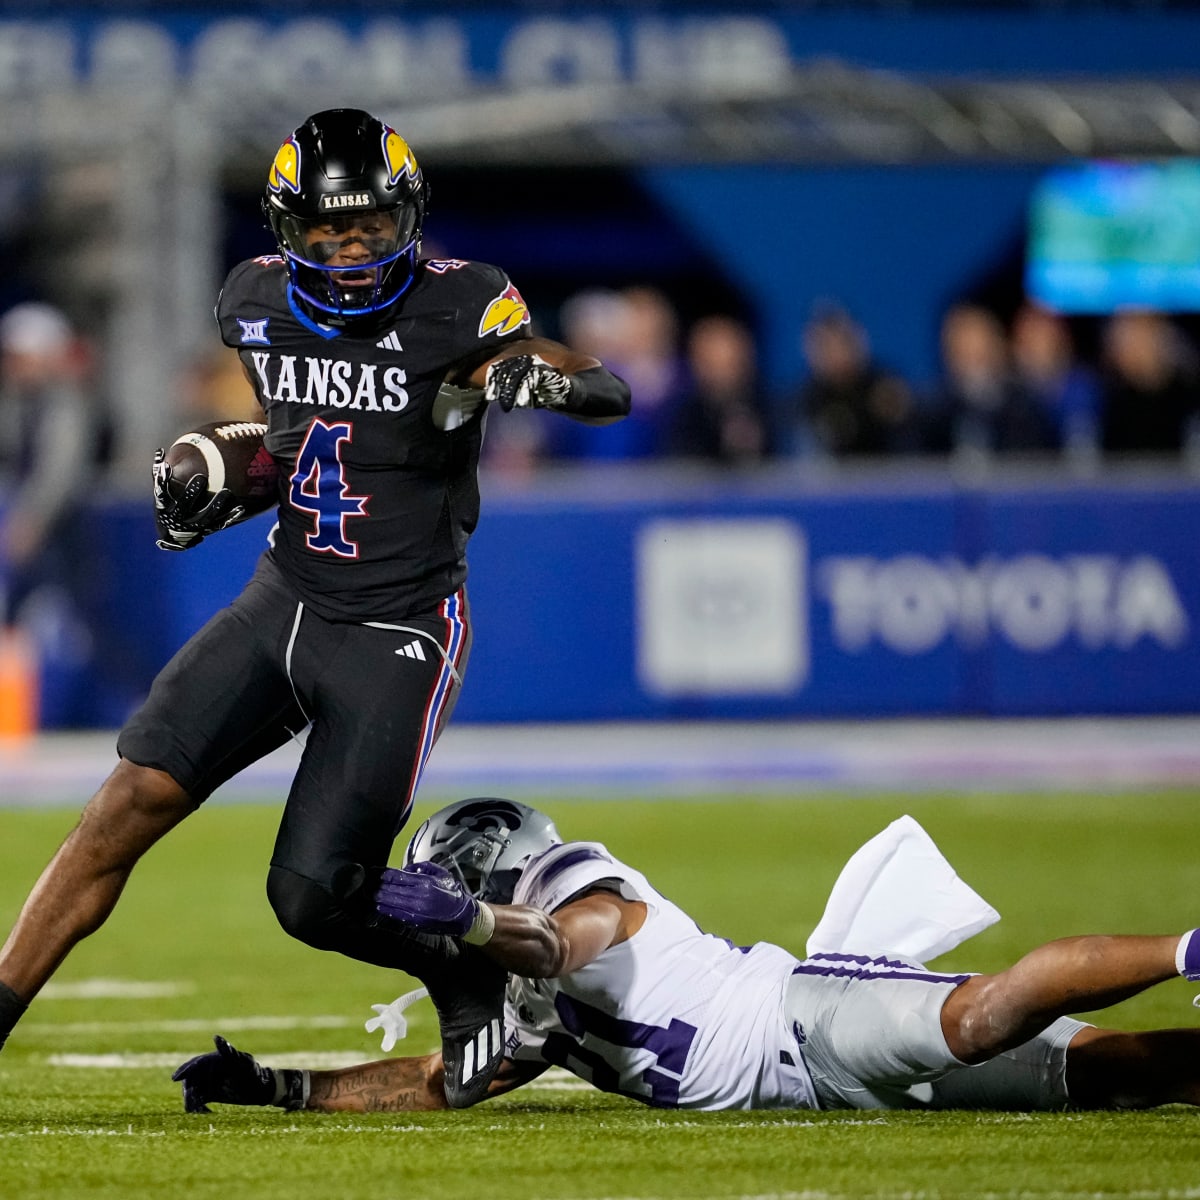 Kansas Jayhawks lose to K-State for 15th straight time: Here are 3  takeaways for KU